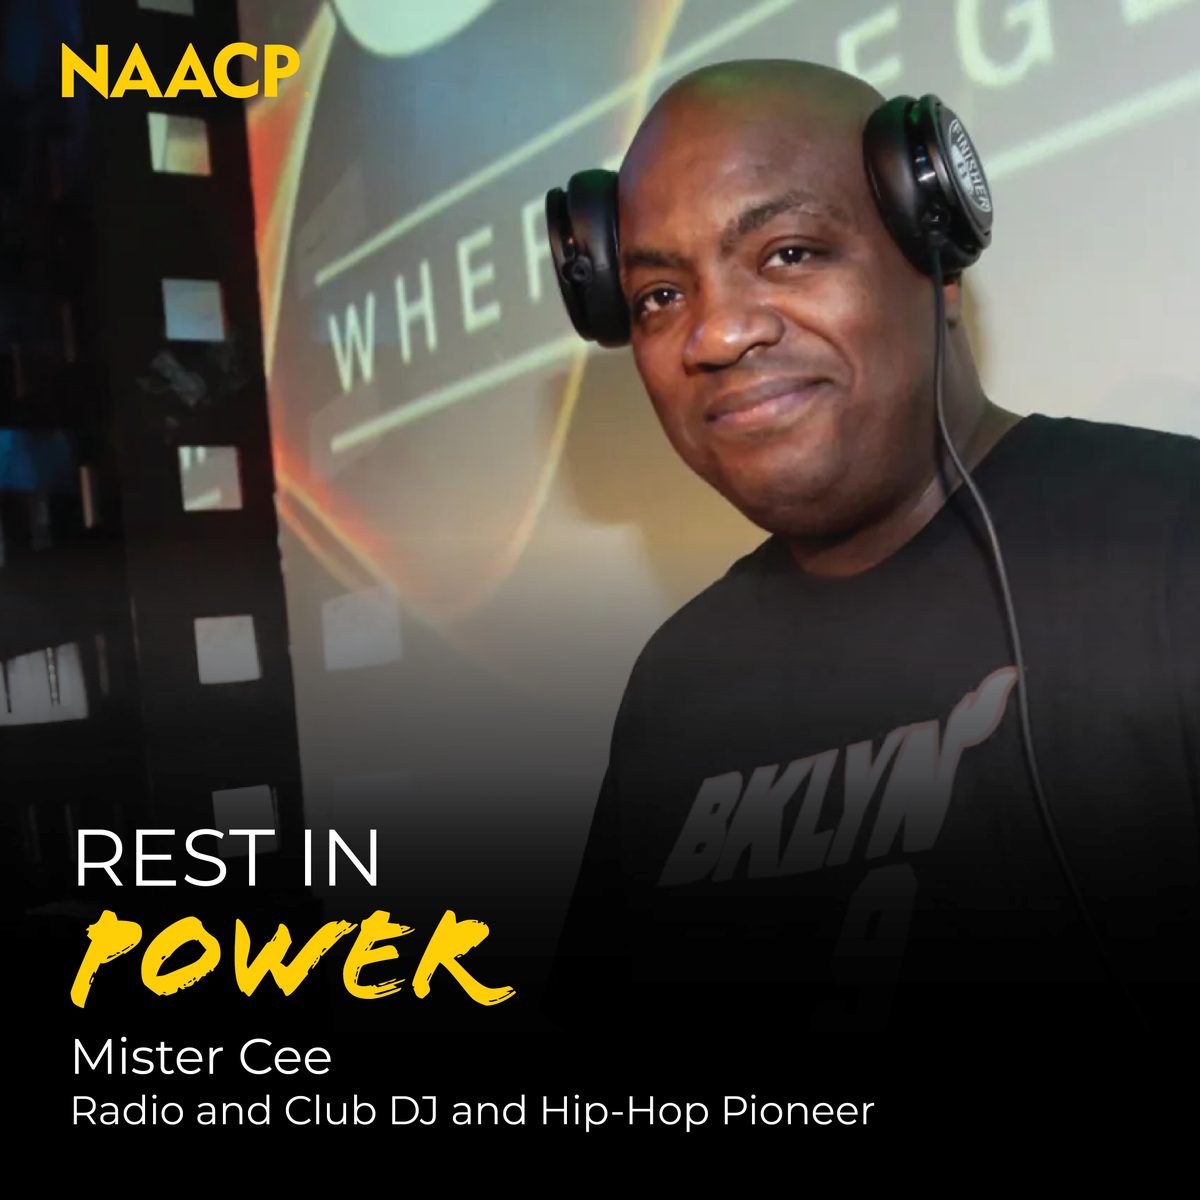 #RestinPower to the legendary DJ Mister Cee who passed away at the age of 57. Brooklyn's own Mister Cee was the official DJ for Big Daddy Kane and introduced us to the Notorious BIG. 

We’re sending his family and friends our condolences. 🖤